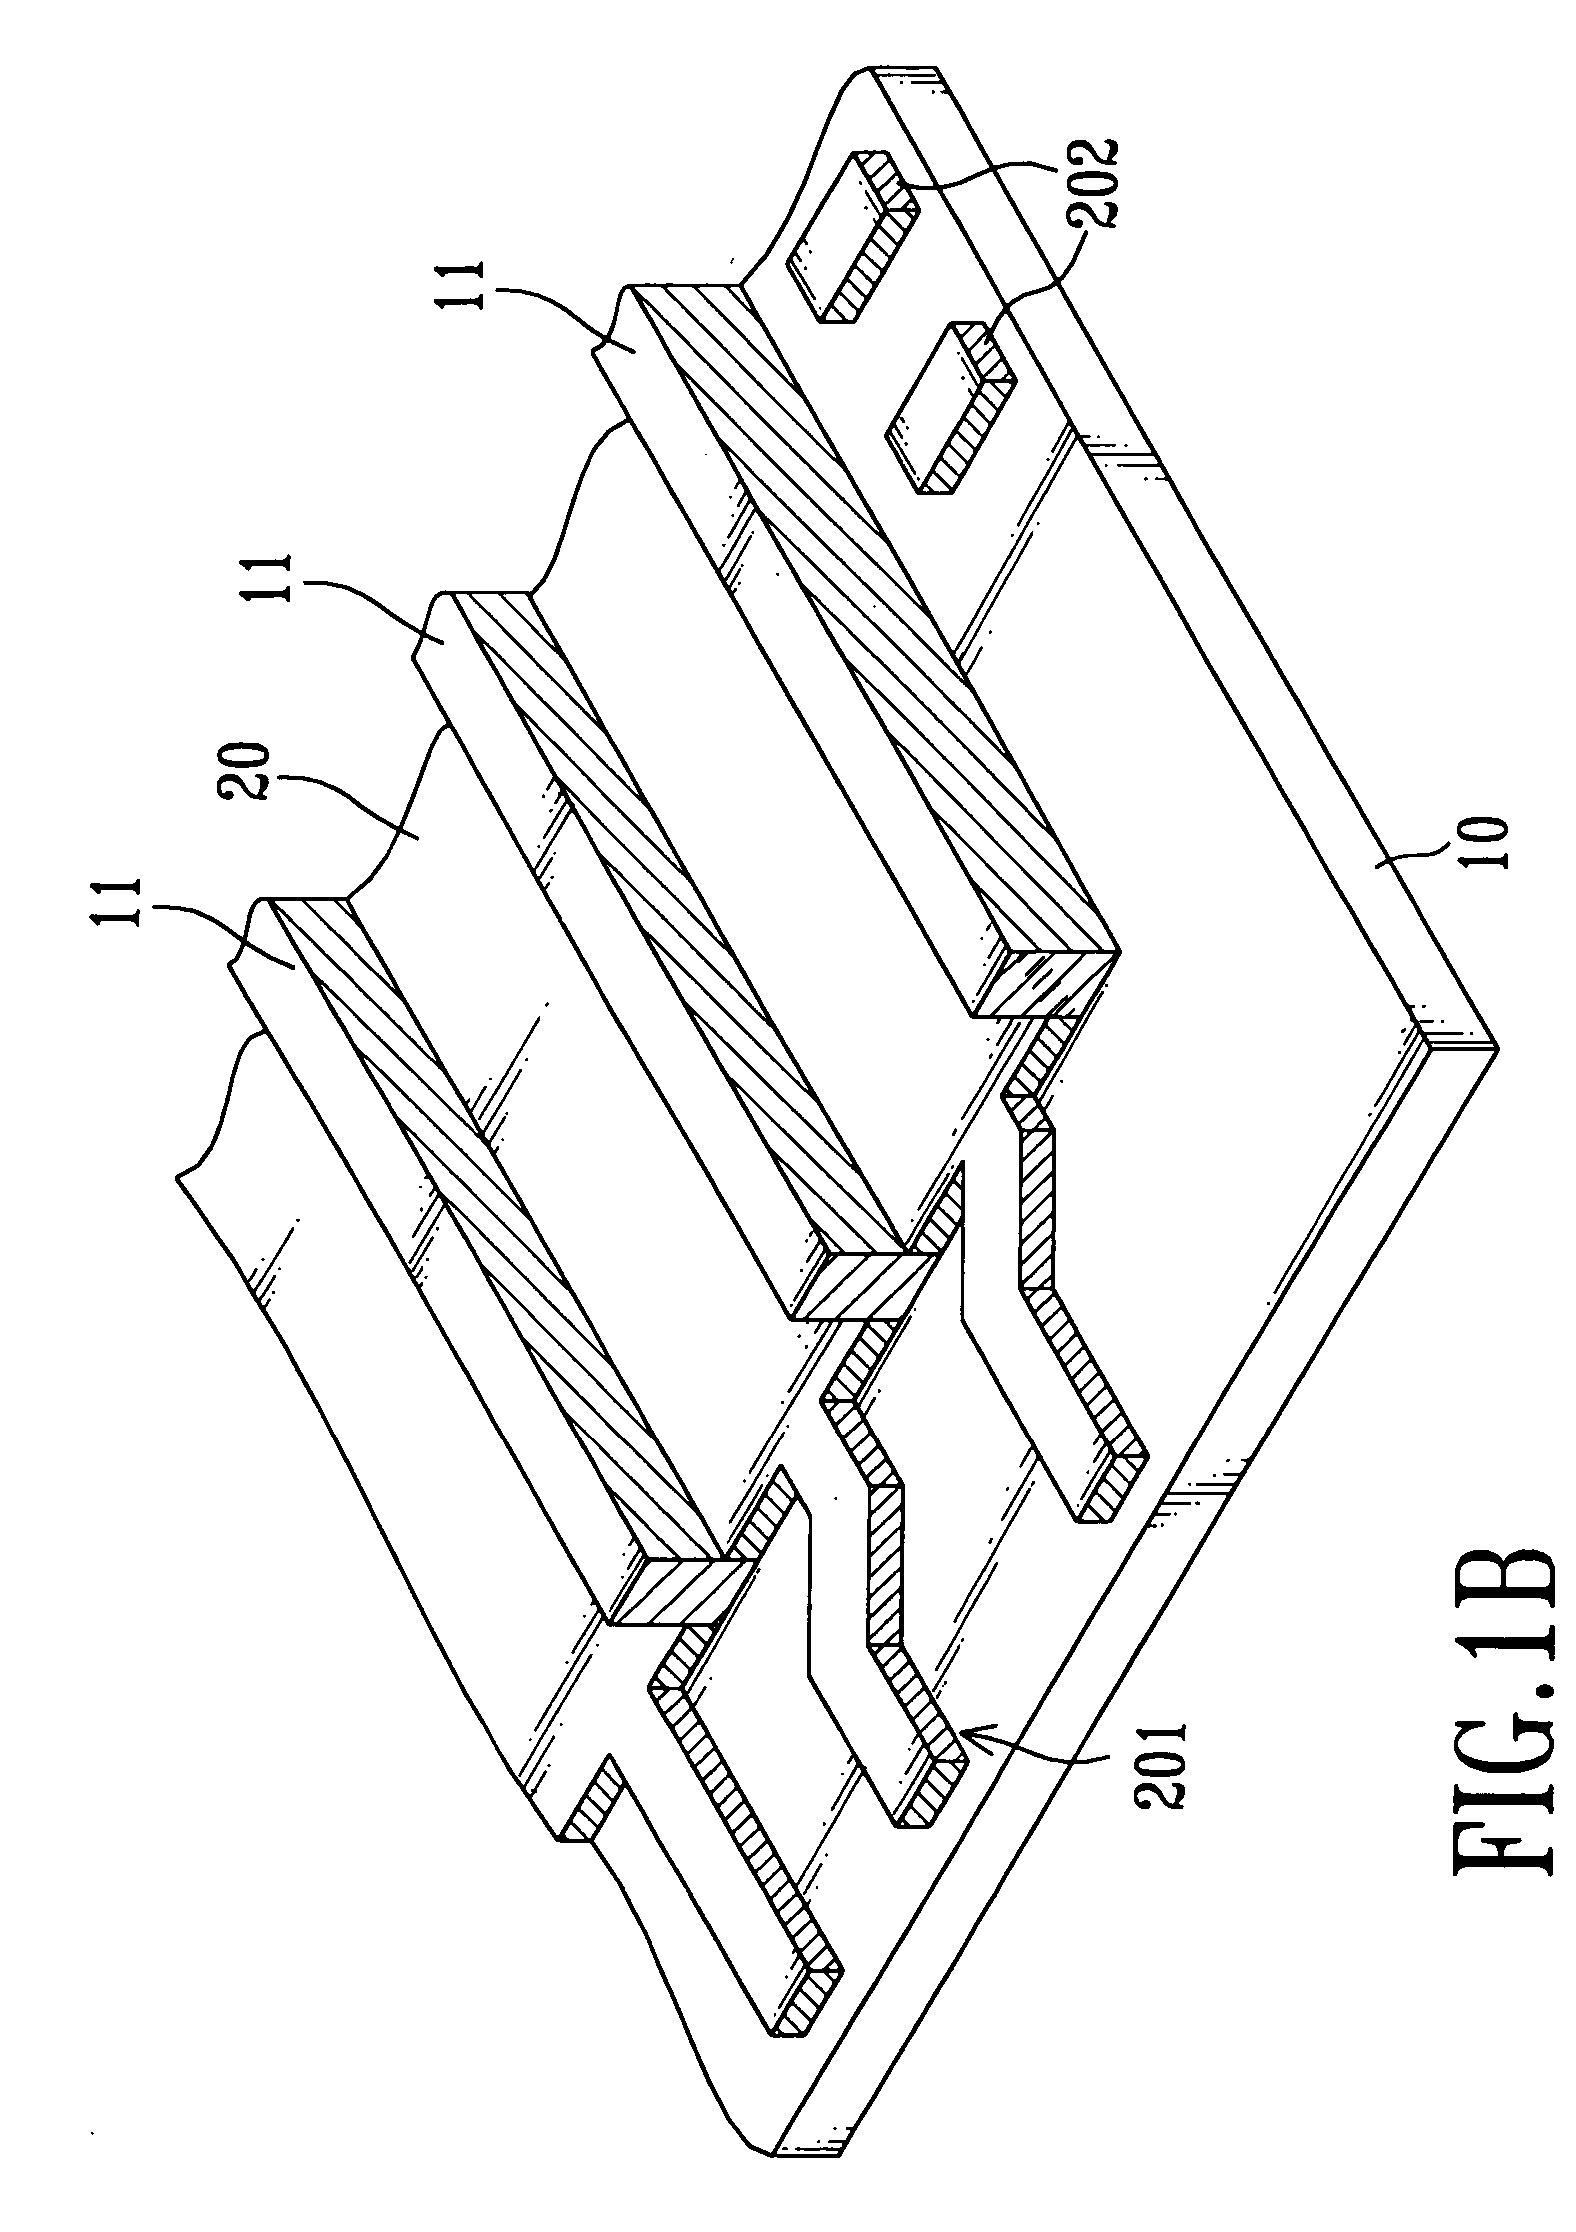 Optical-interference type display panel and method for making the same